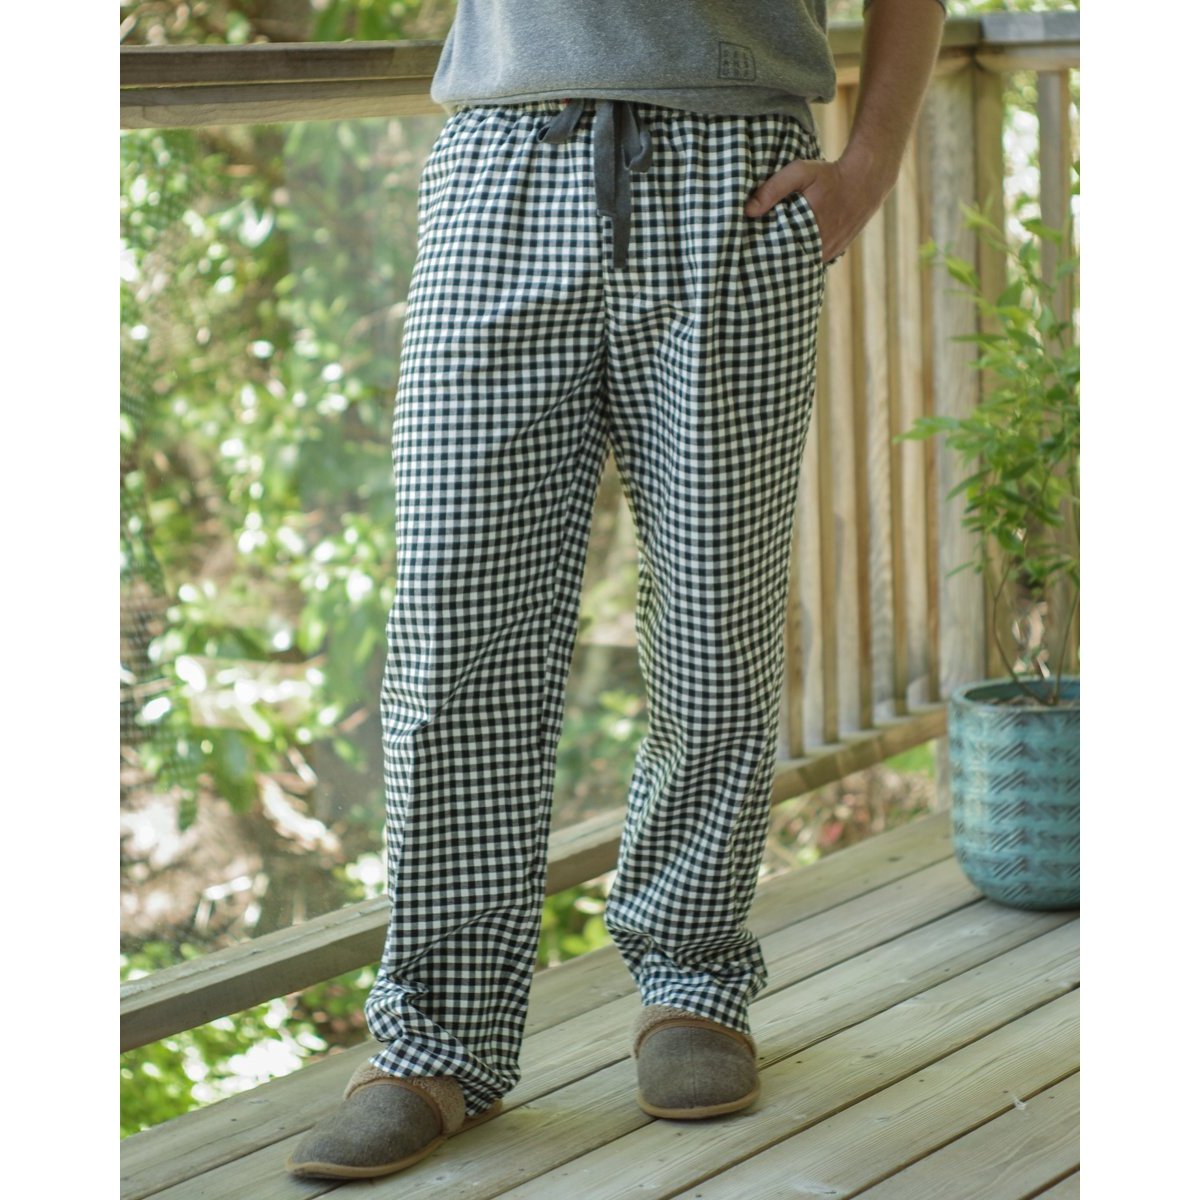 Thread Theory Eastwood Pajamas Paper Pattern-Pattern-Spool of Thread